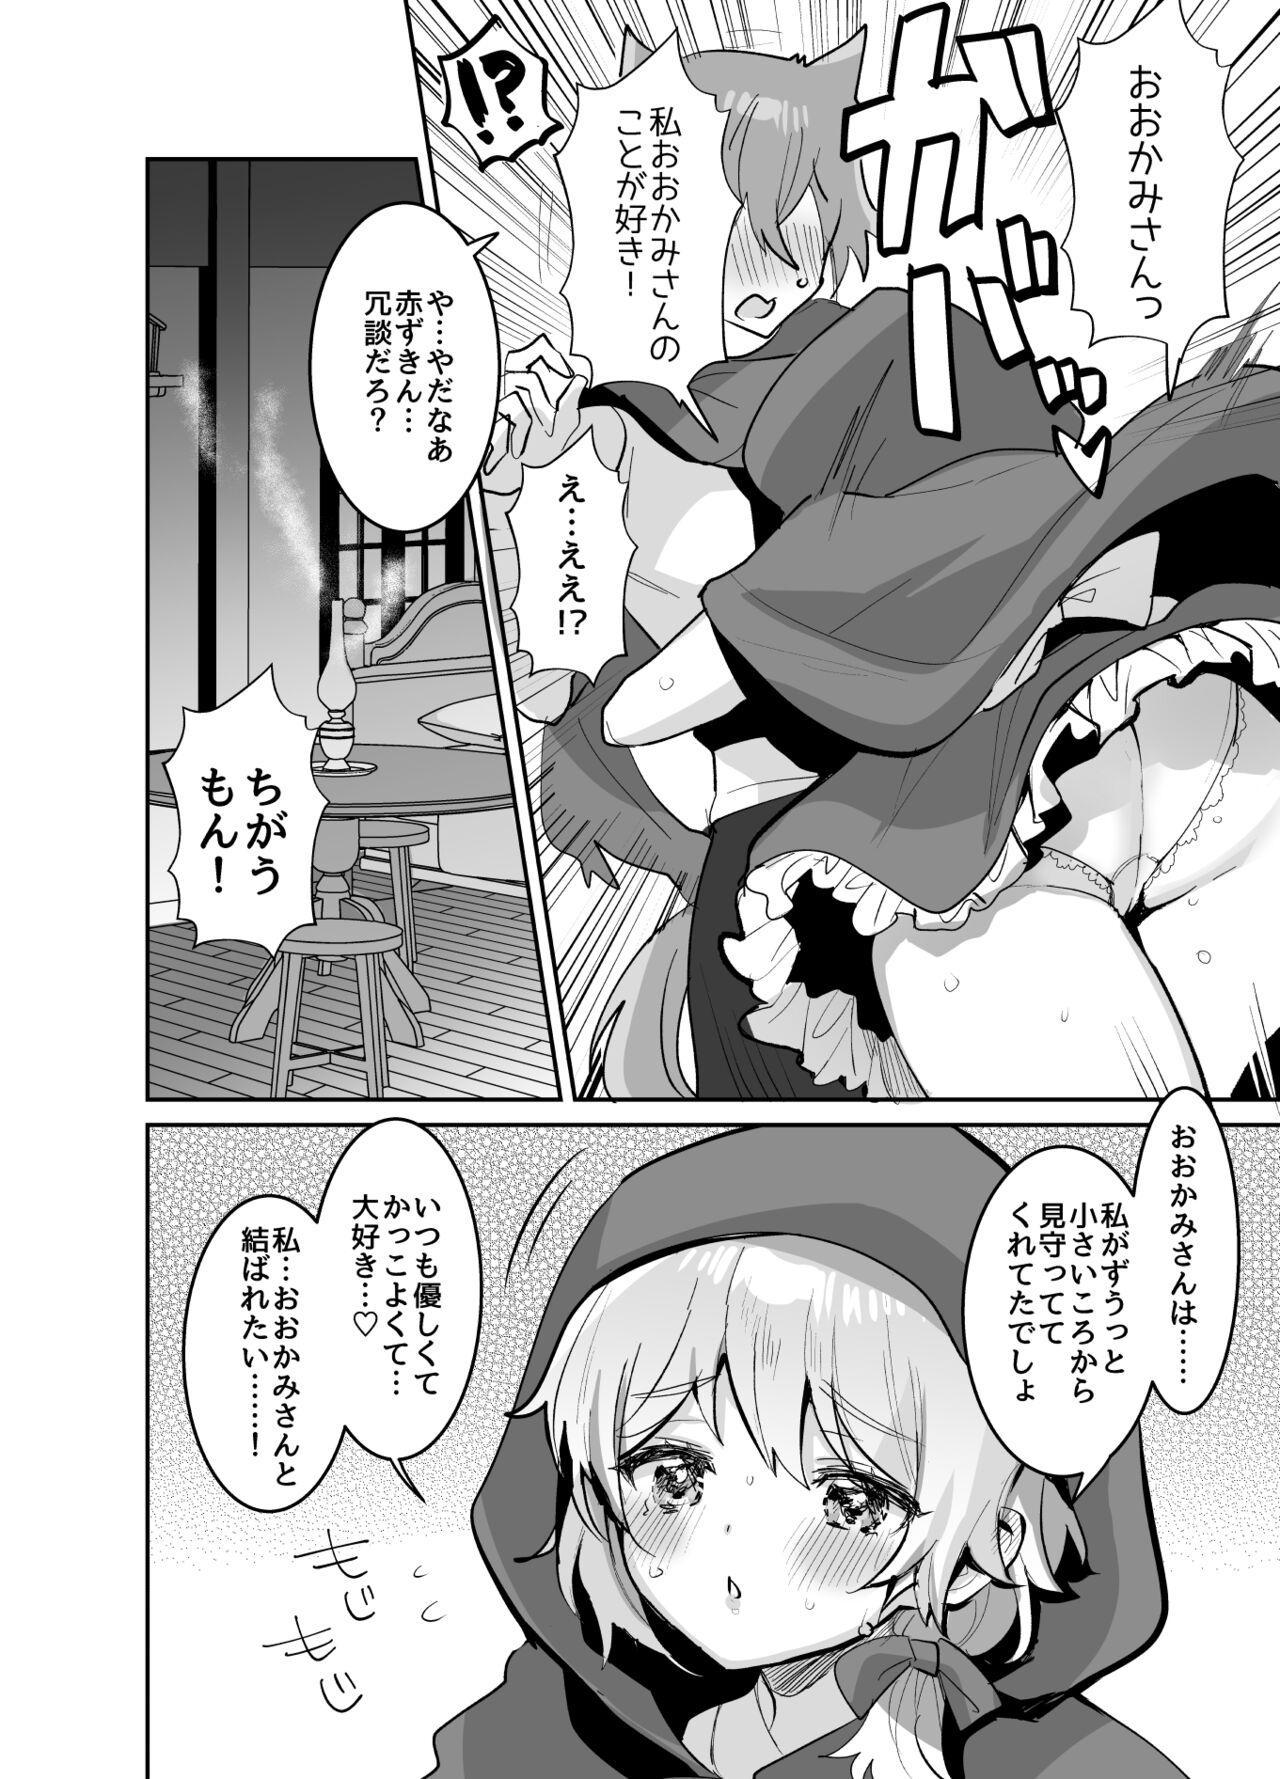 Tattooed 赤ずきんちゃんに犯される!! - Little red riding hood Time - Page 5